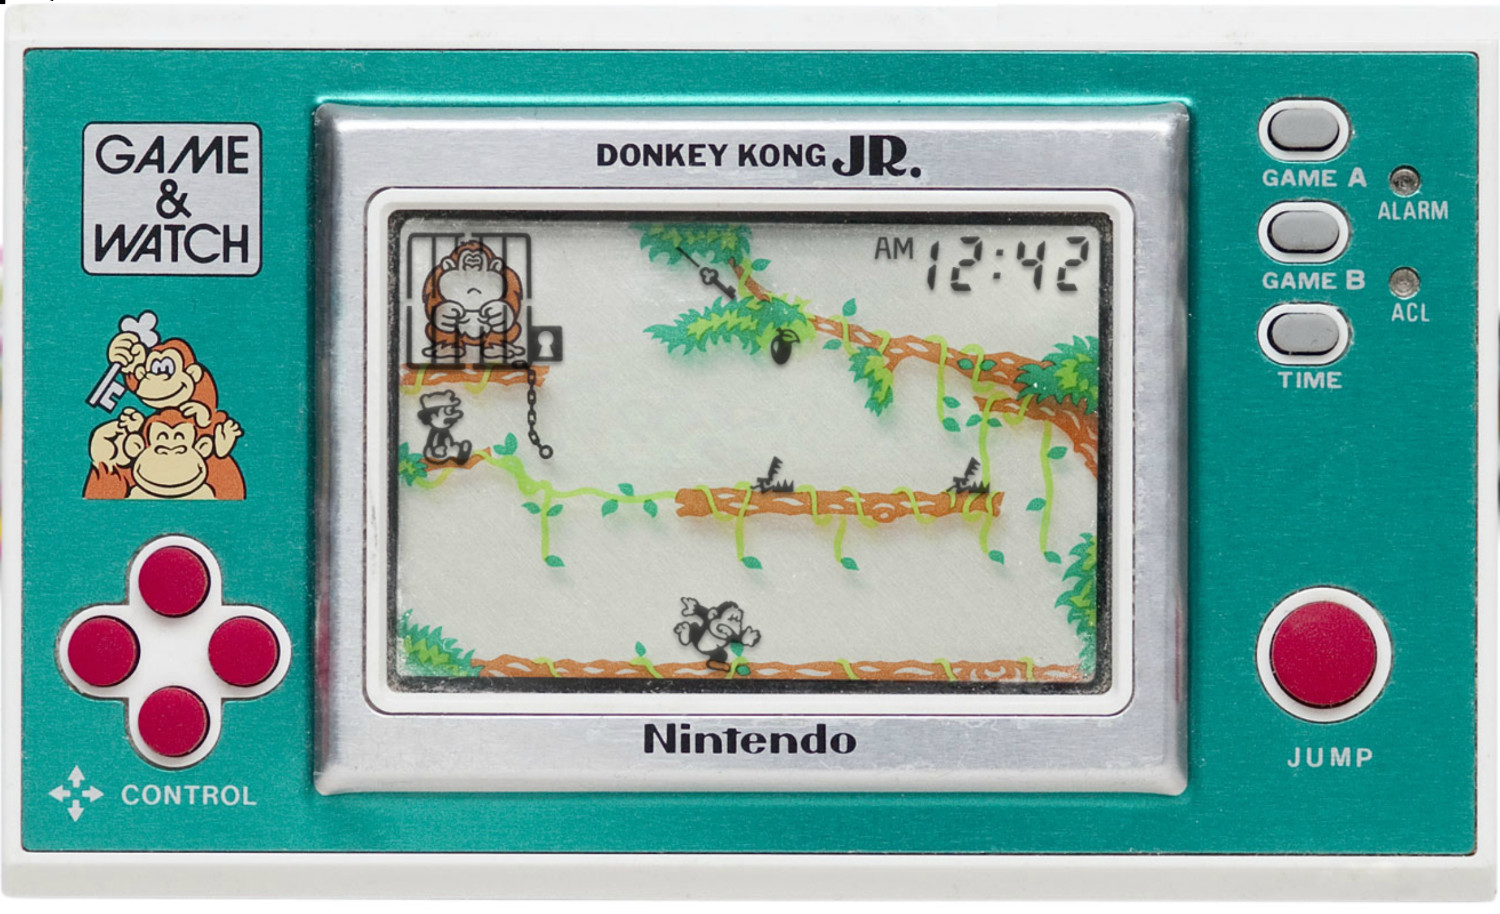 Le jeu Donkey Kong Jr. sur Game and Watch // Source : Pica-Pic.com